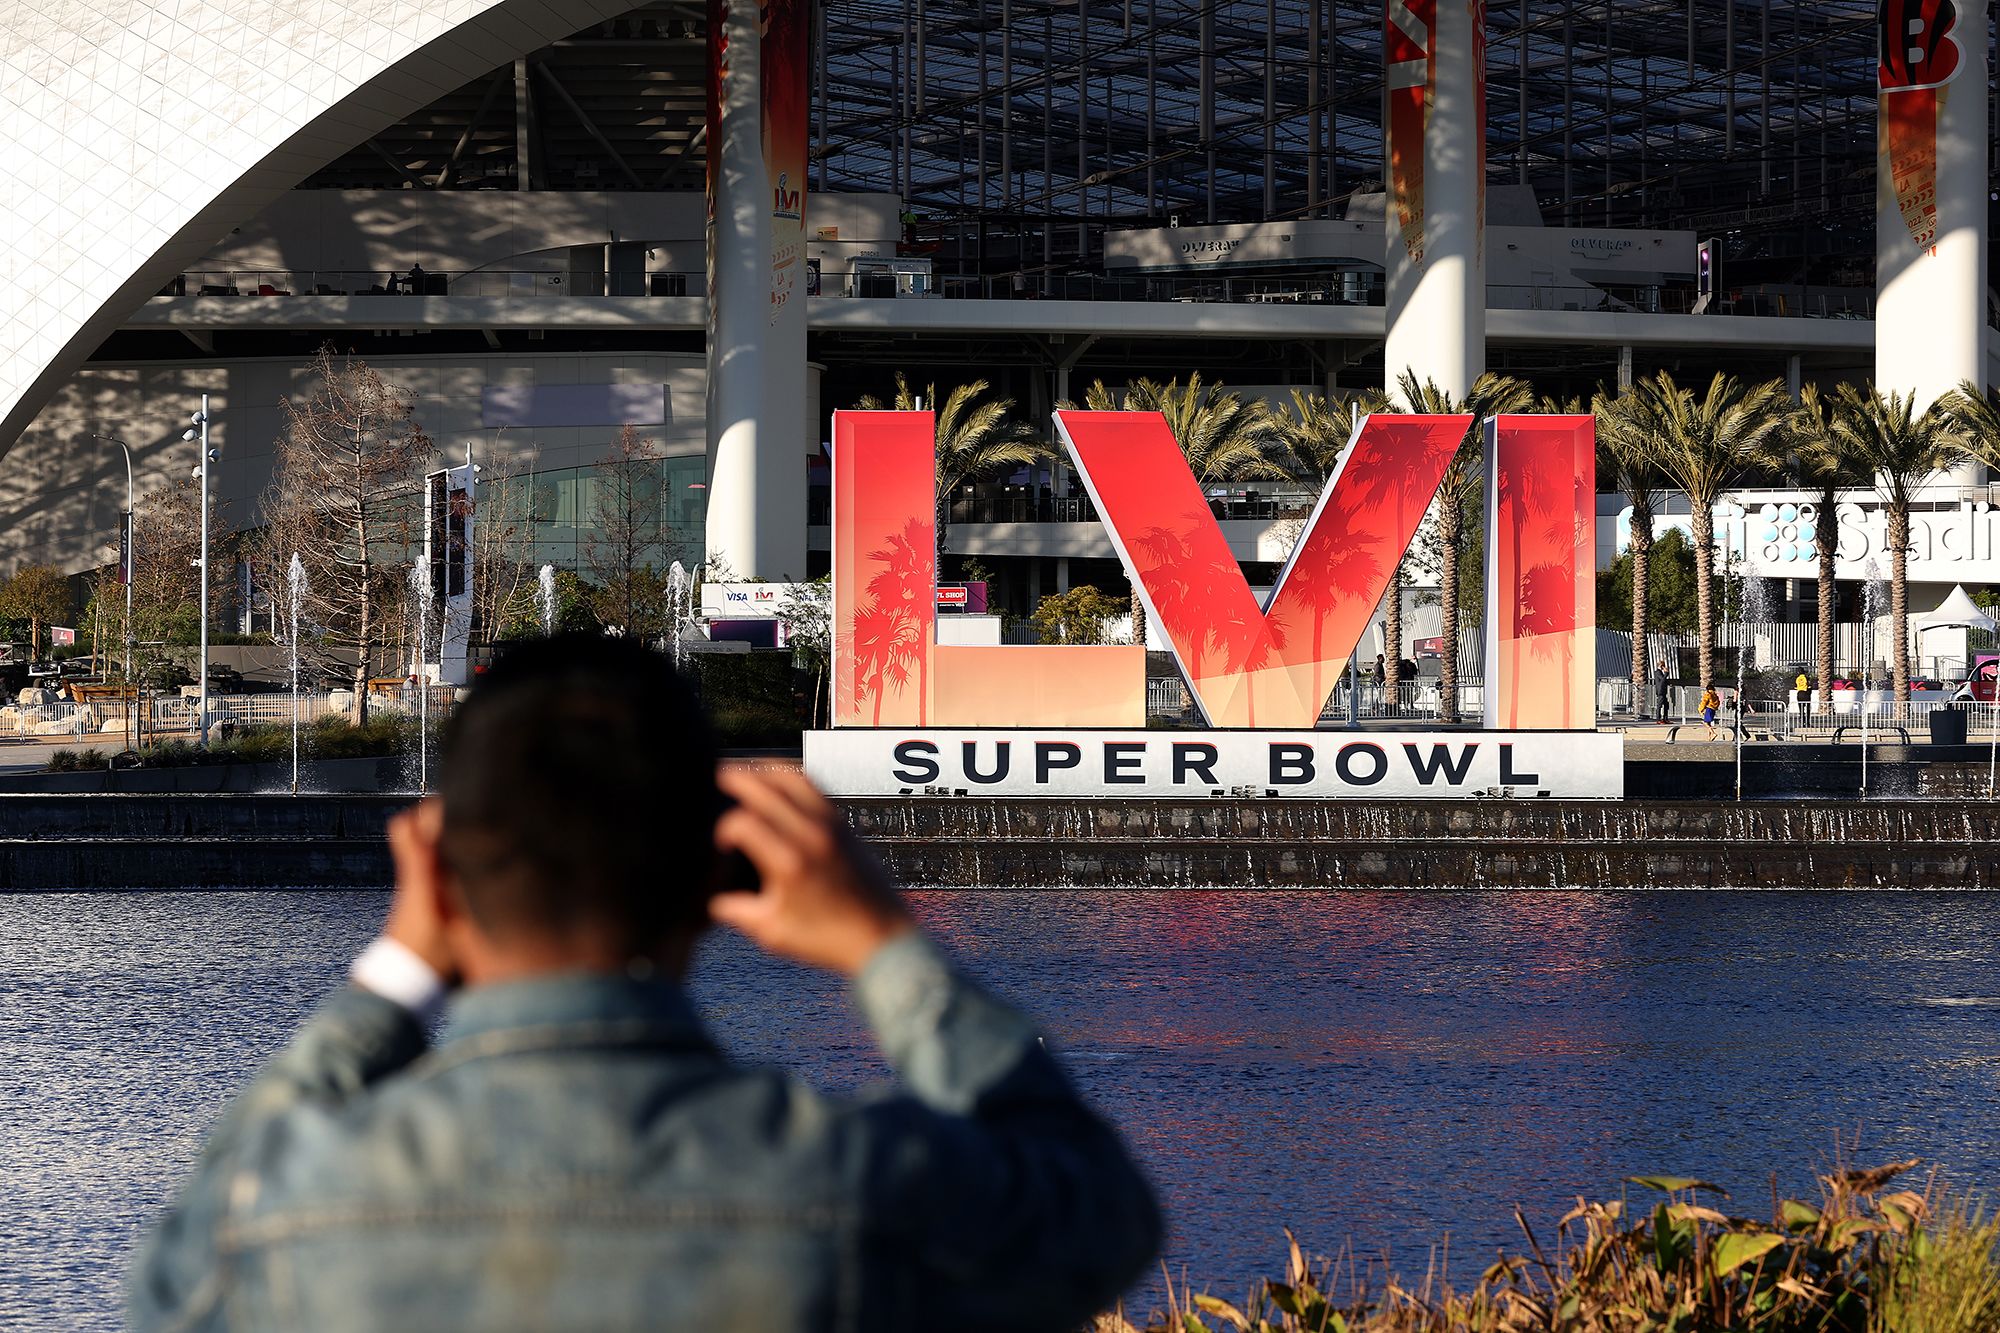 Super Bowl ticket prices have dropped but they'll still cost you